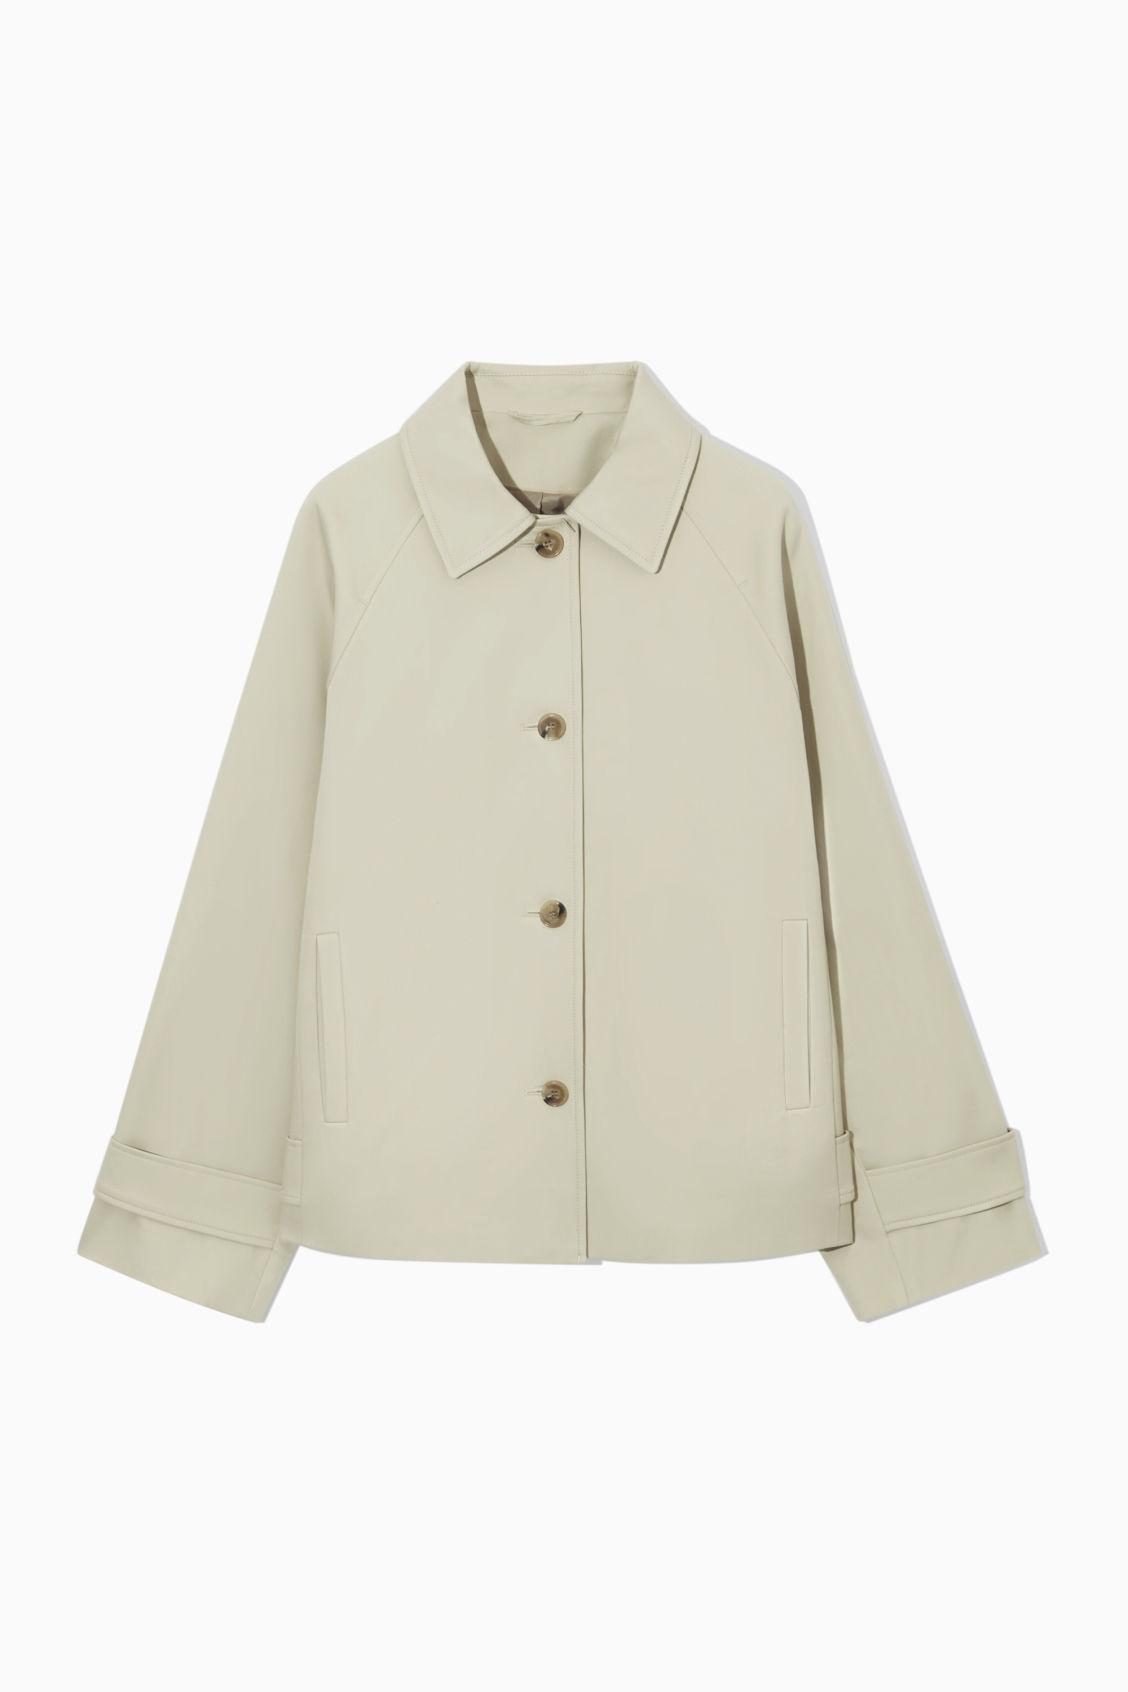 COS Minimal Short Trench Coat in Natural | Lyst